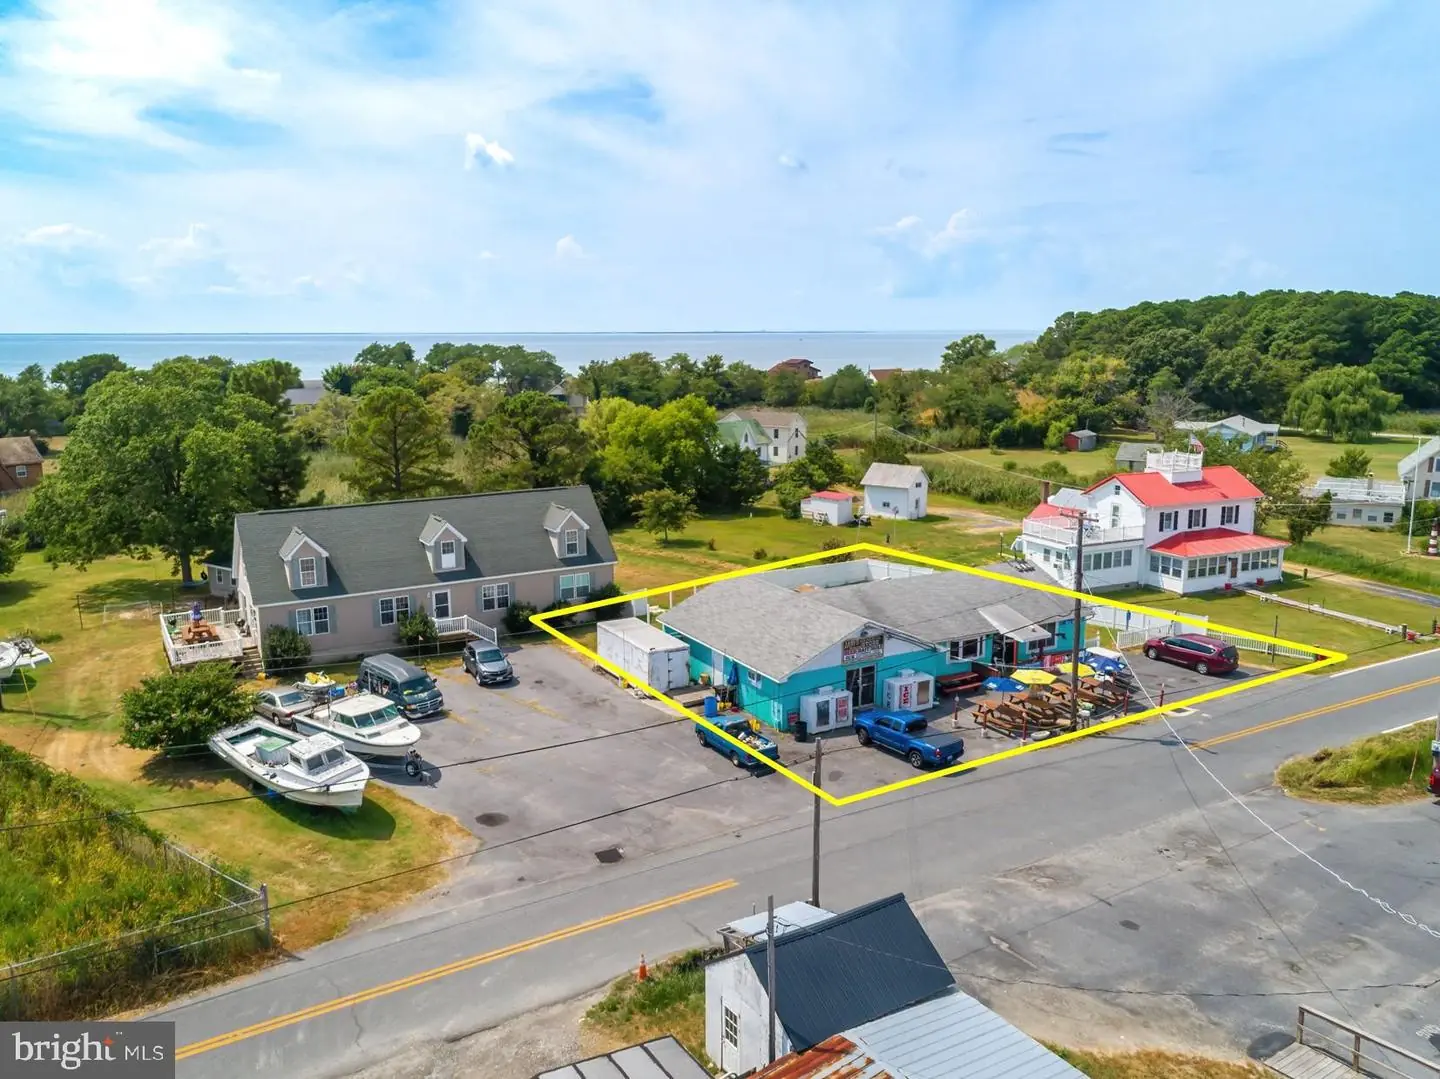 MDSO2003732-802638973994-2023-09-28-10-56-03 8952 Deal Island Rd | Deal Island, MD Real Estate For Sale | MLS# Mdso2003732  - Ocean Atlantic